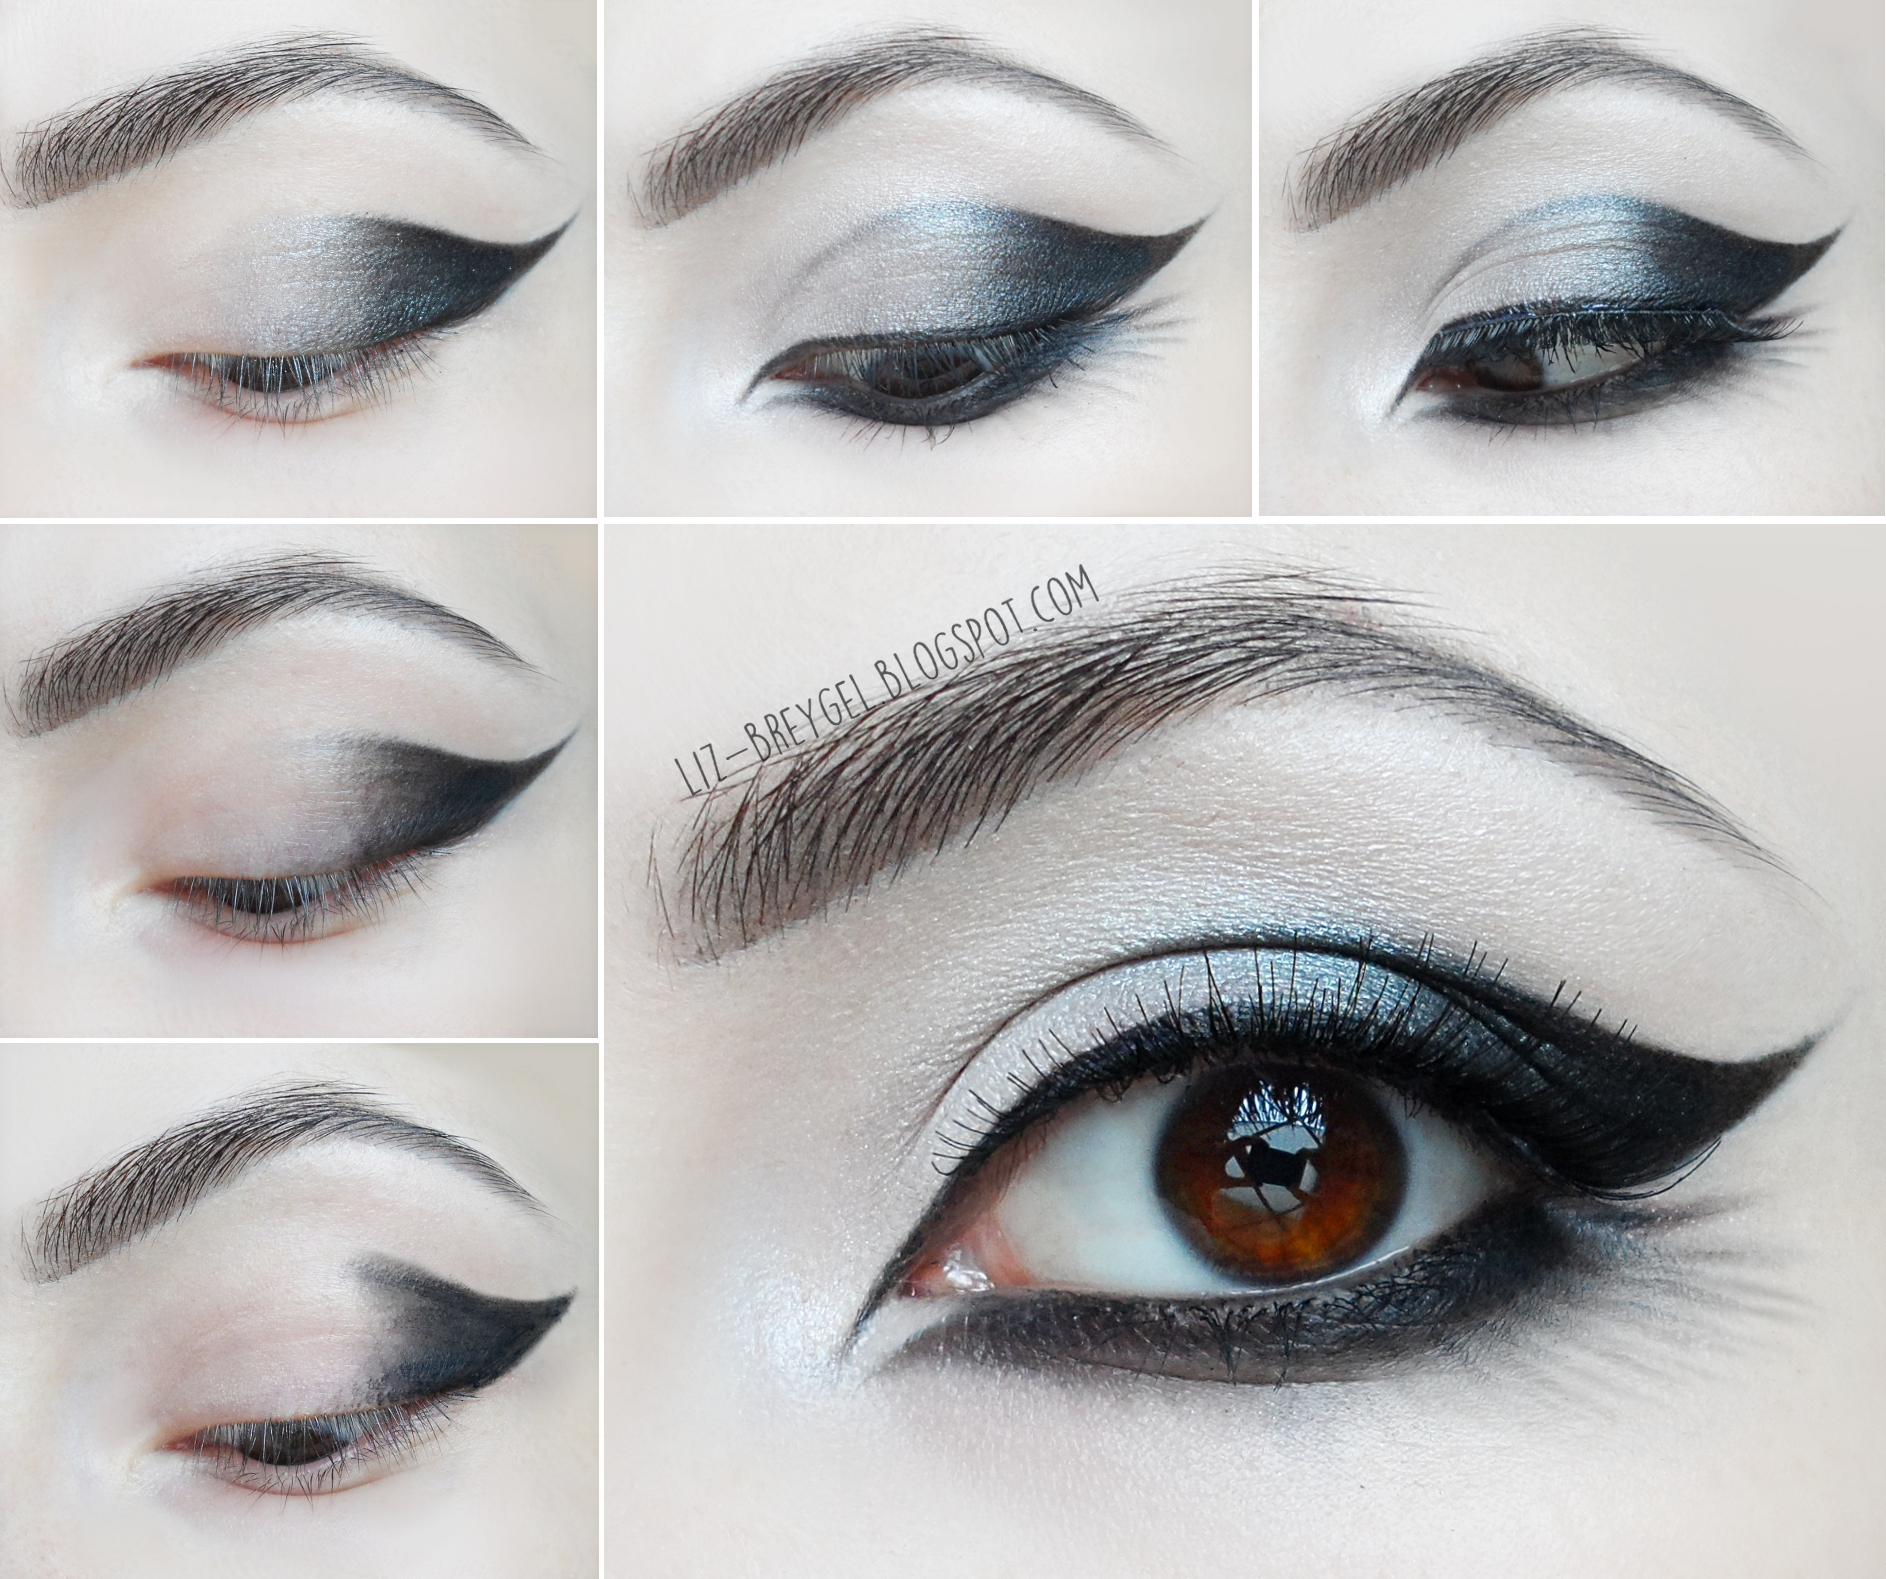 la step-by-step pictorial of a beautiful gothic eye makeup look with instructions